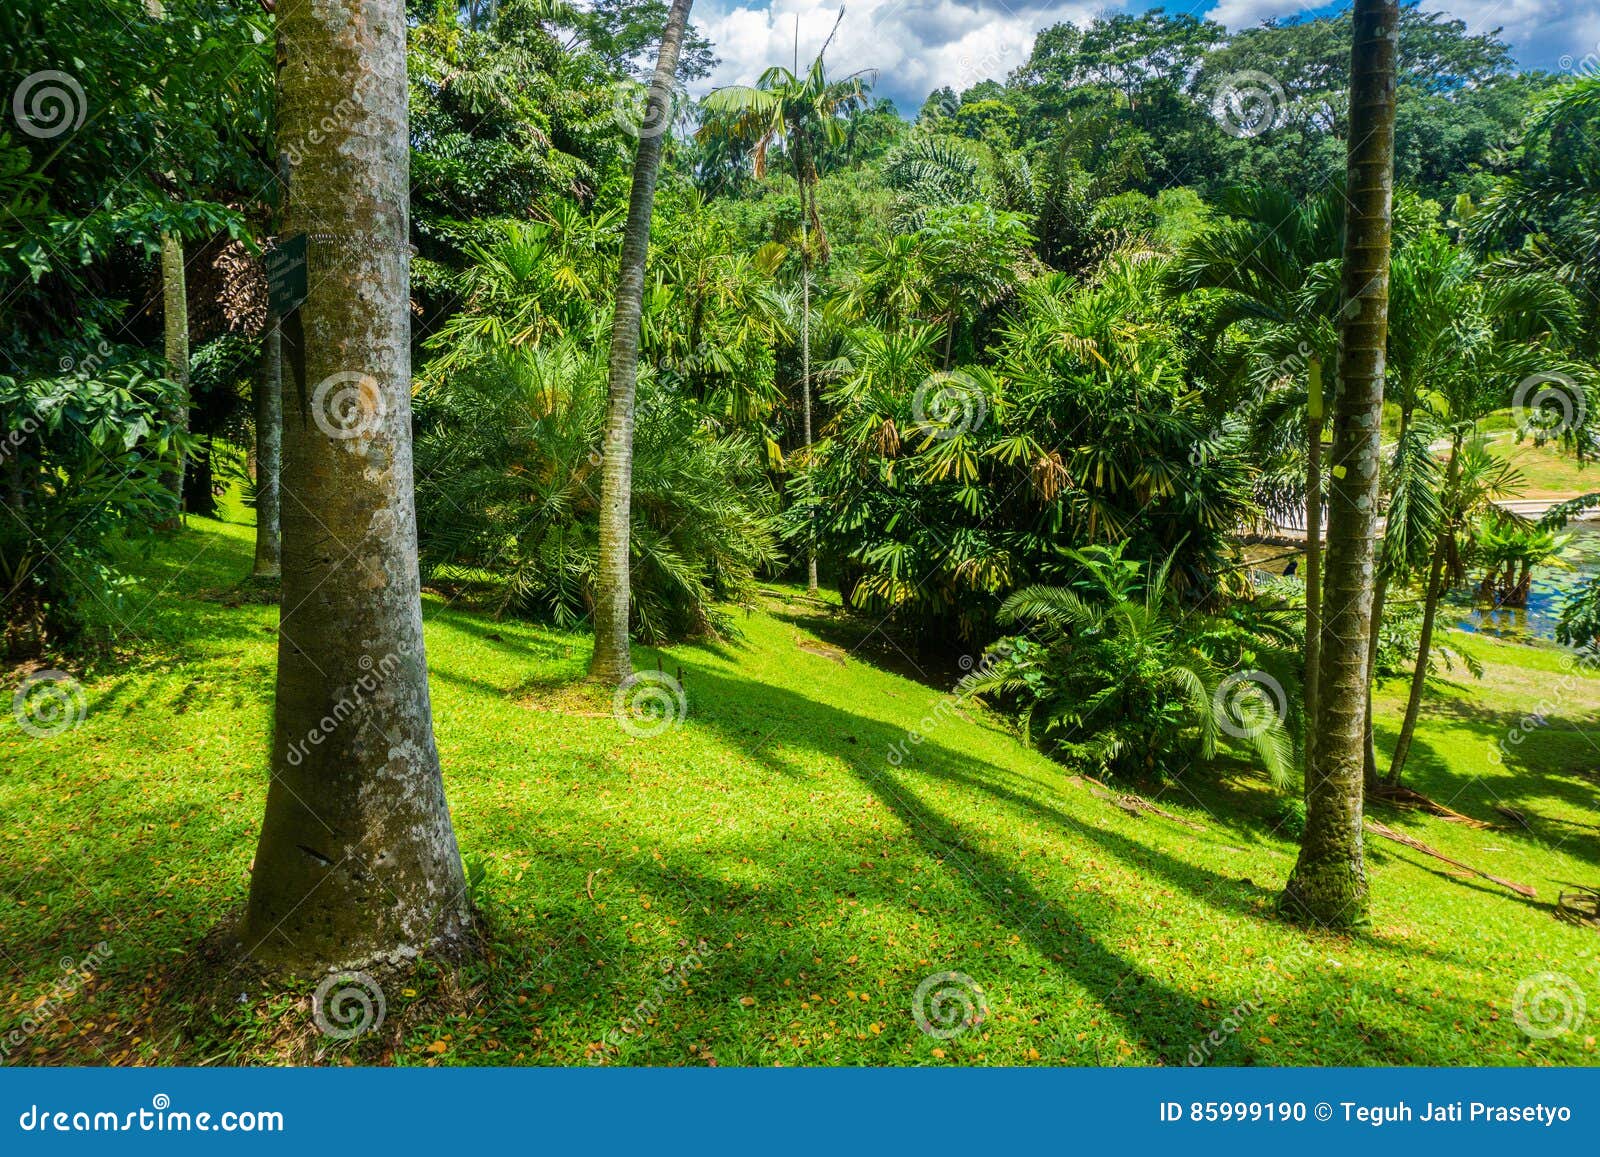 A Landscape in a Hill with Big and High Tree, Bushes and Green Grass ...